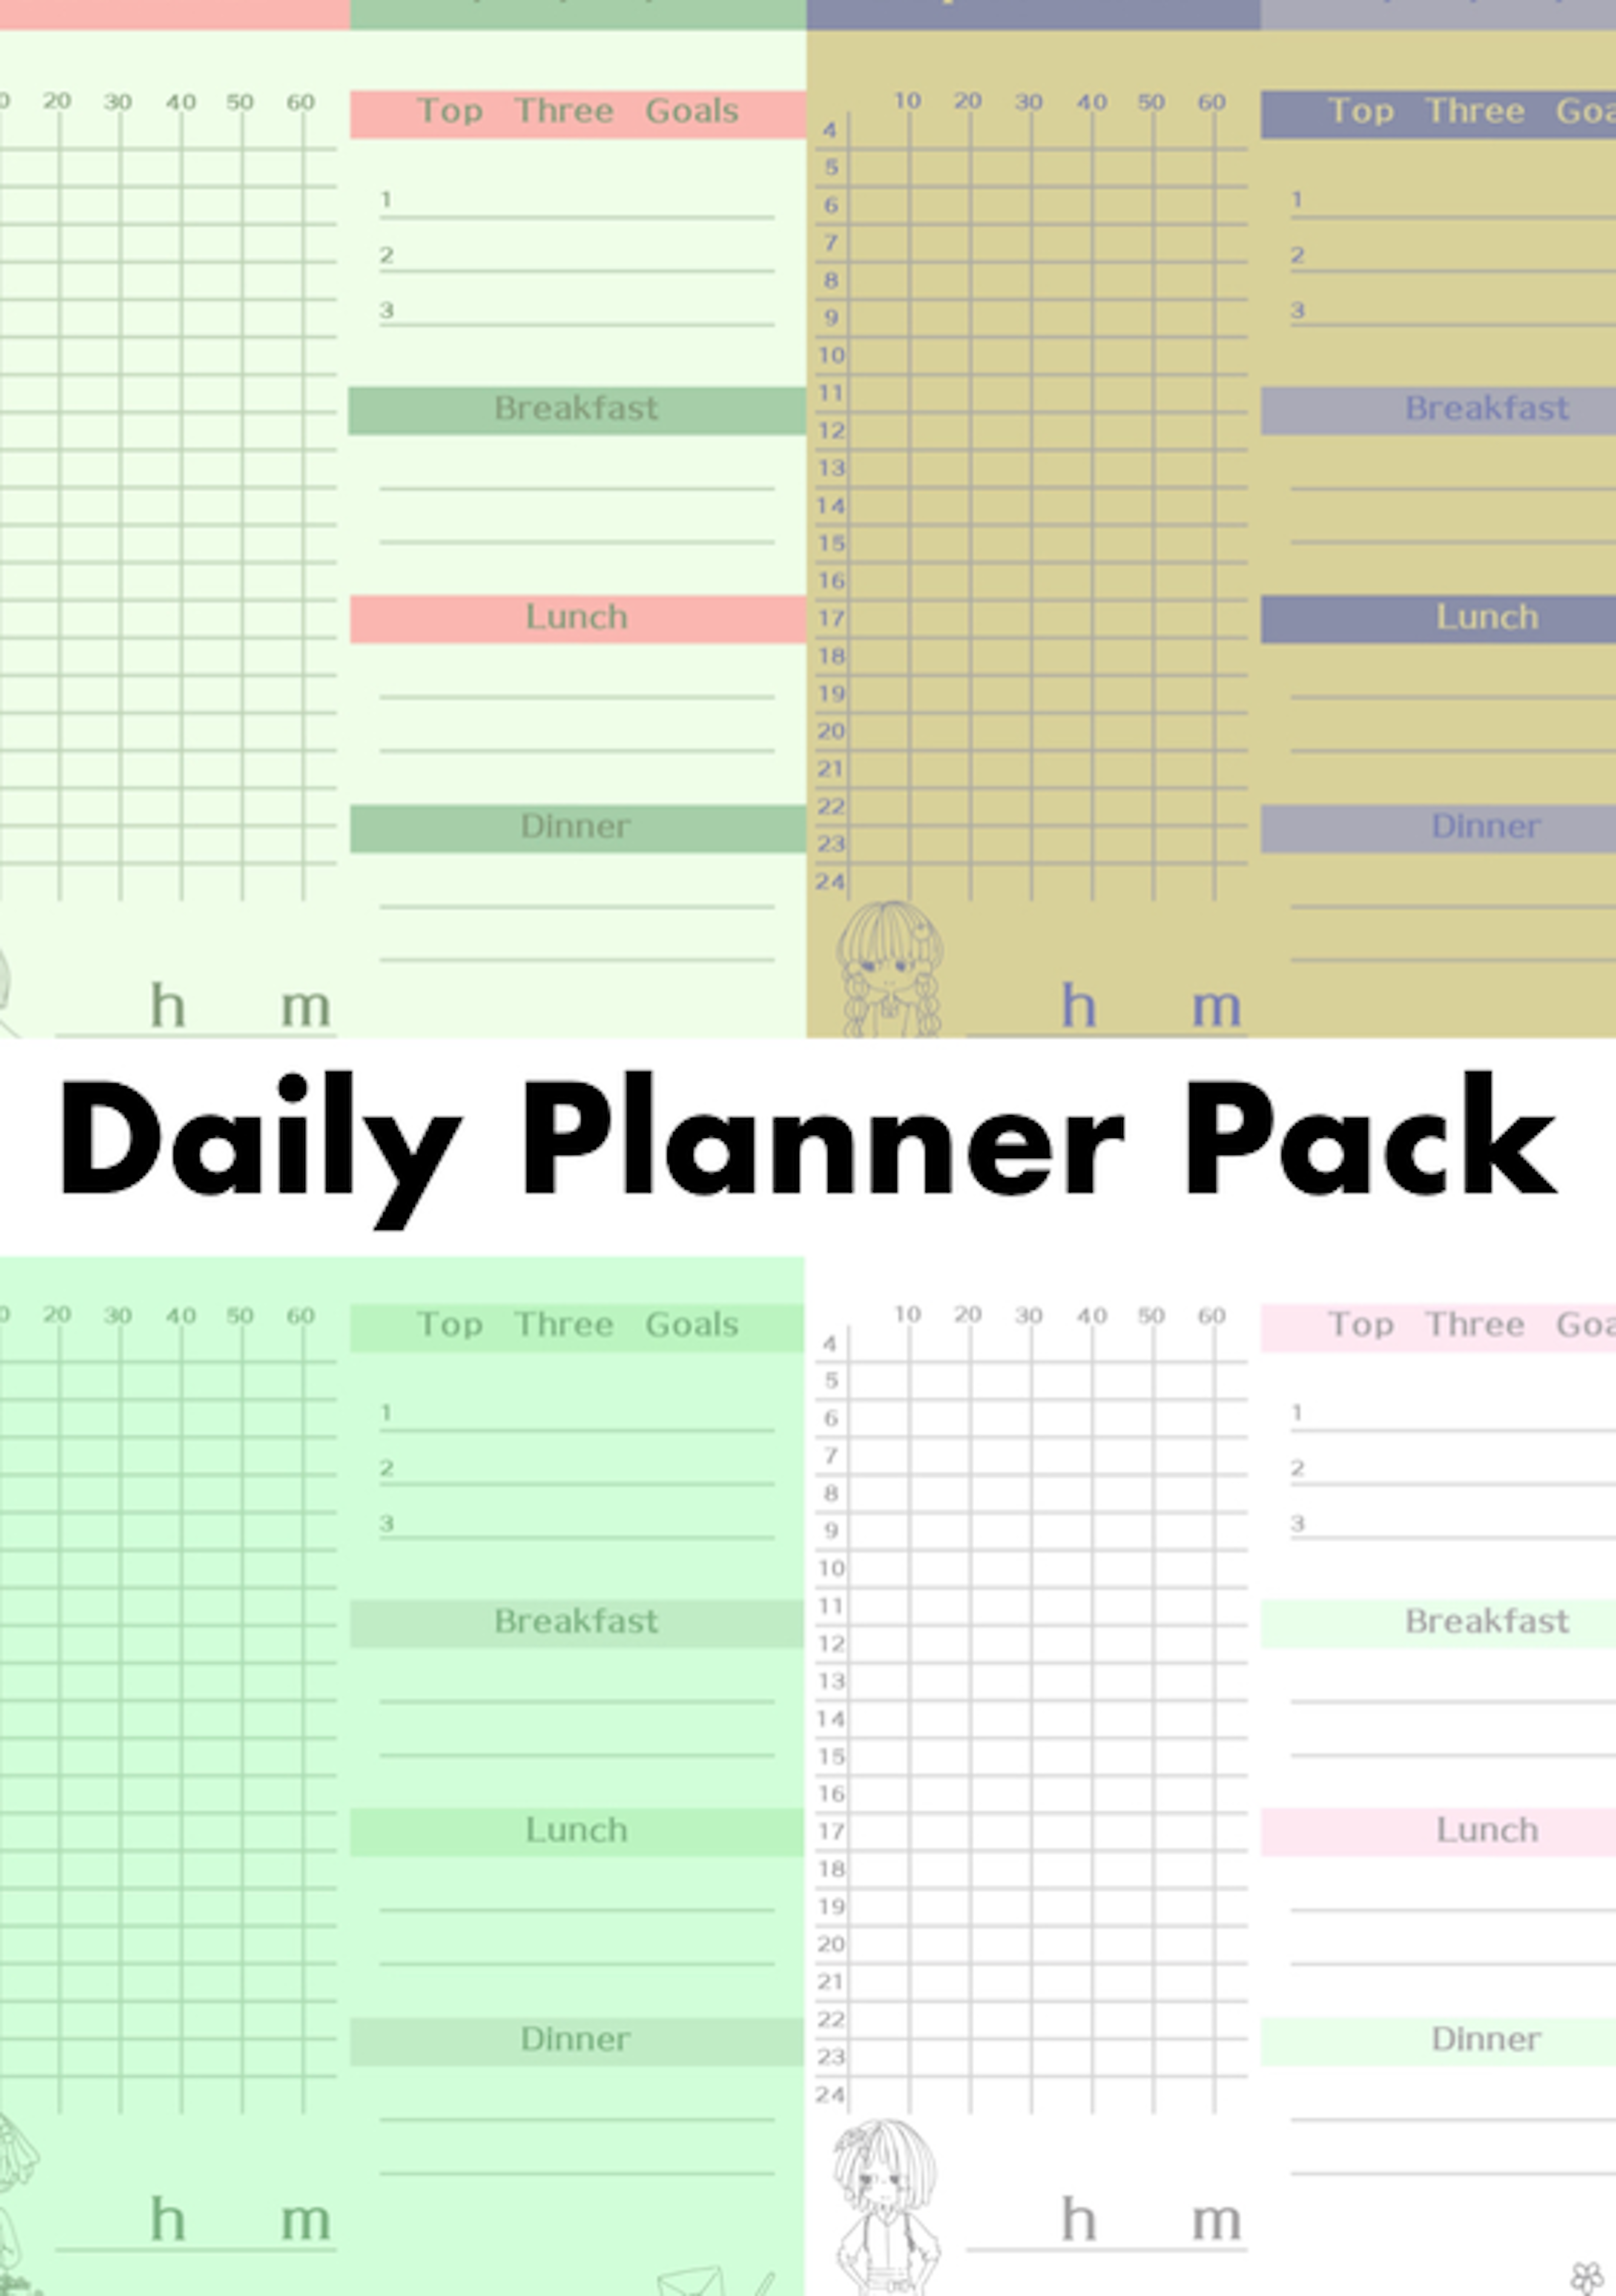 Daily Planner Pack